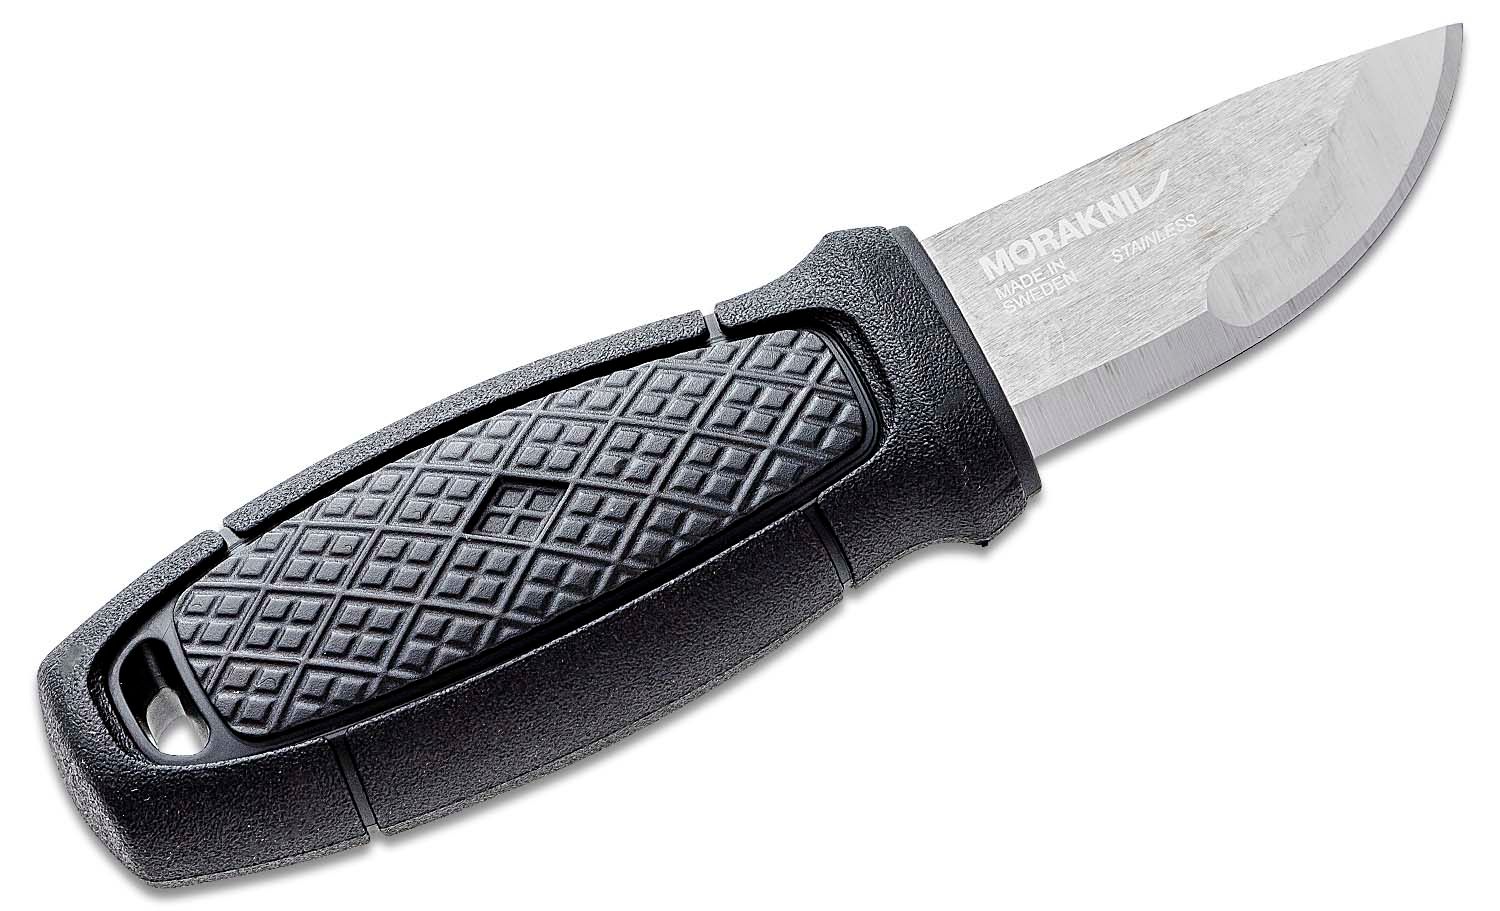 Mora Knives Tactical Fixed Blade, Stainles Steel, Black Rubber Handle